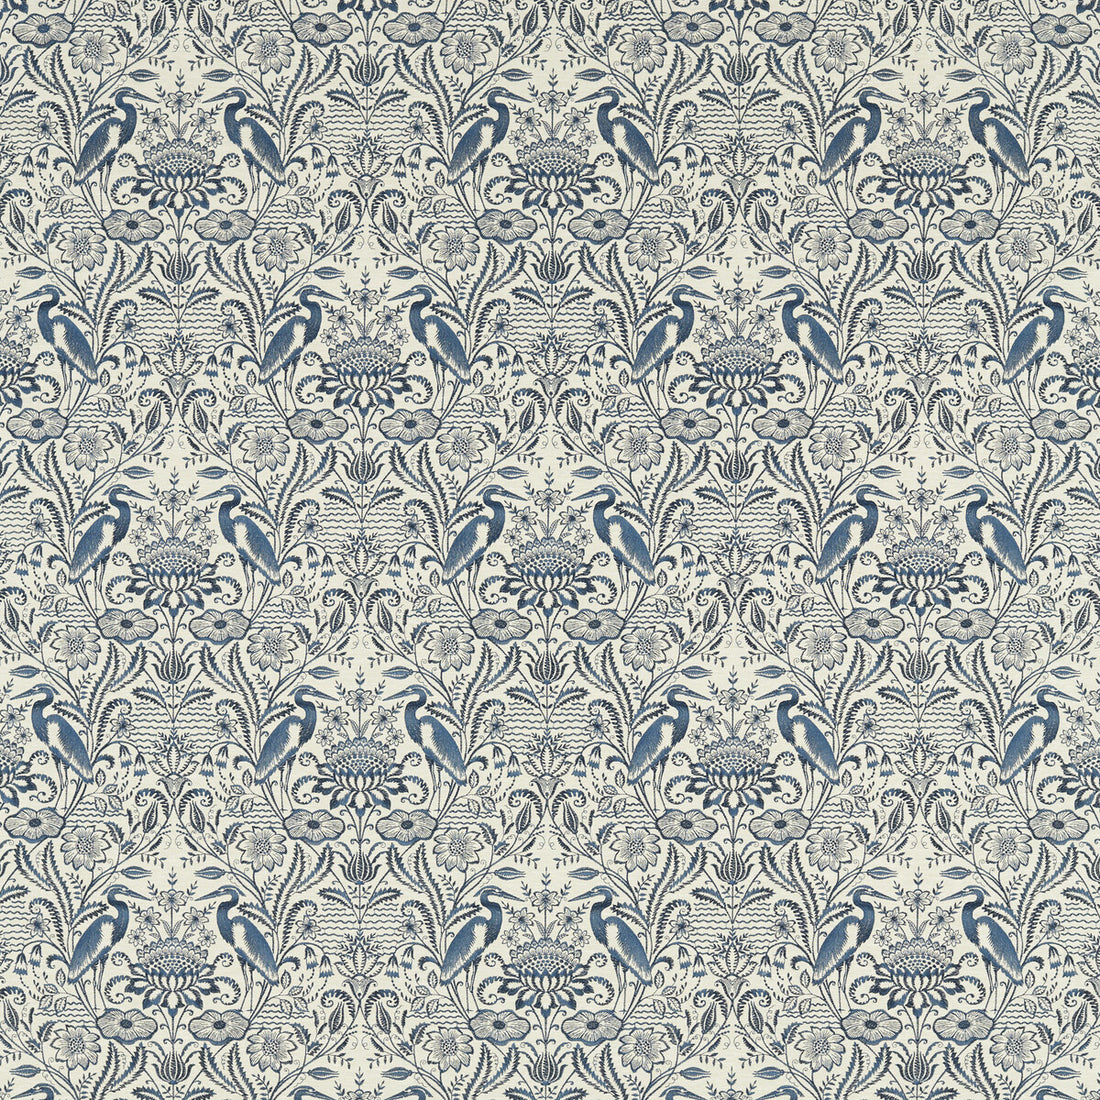 Nakuru fabric in midnight/linen color - pattern F1547/04.CAC.0 - by Clarke And Clarke in the Clarke &amp; Clarke Vintage collection